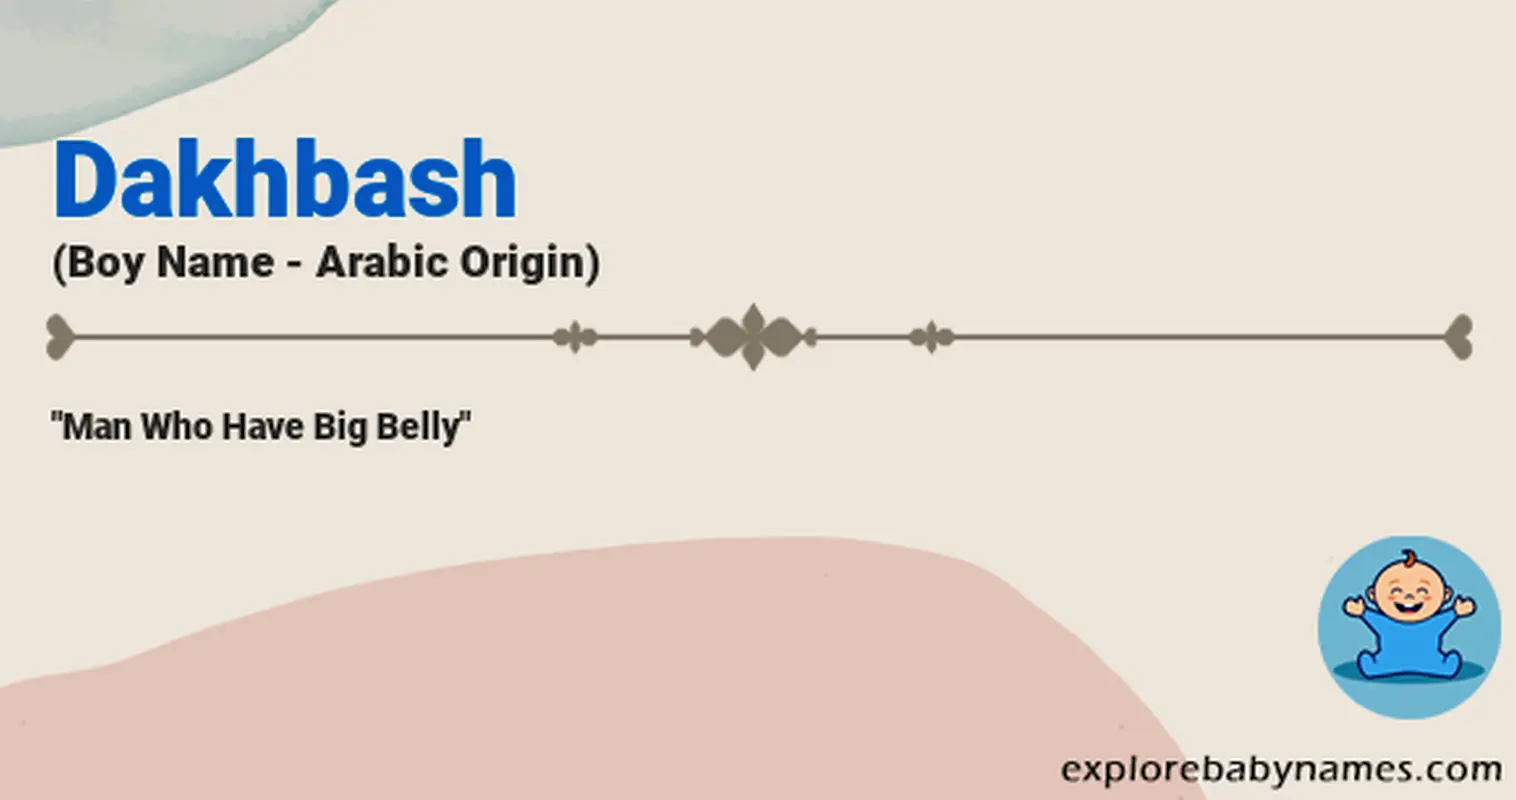 Meaning of Dakhbash